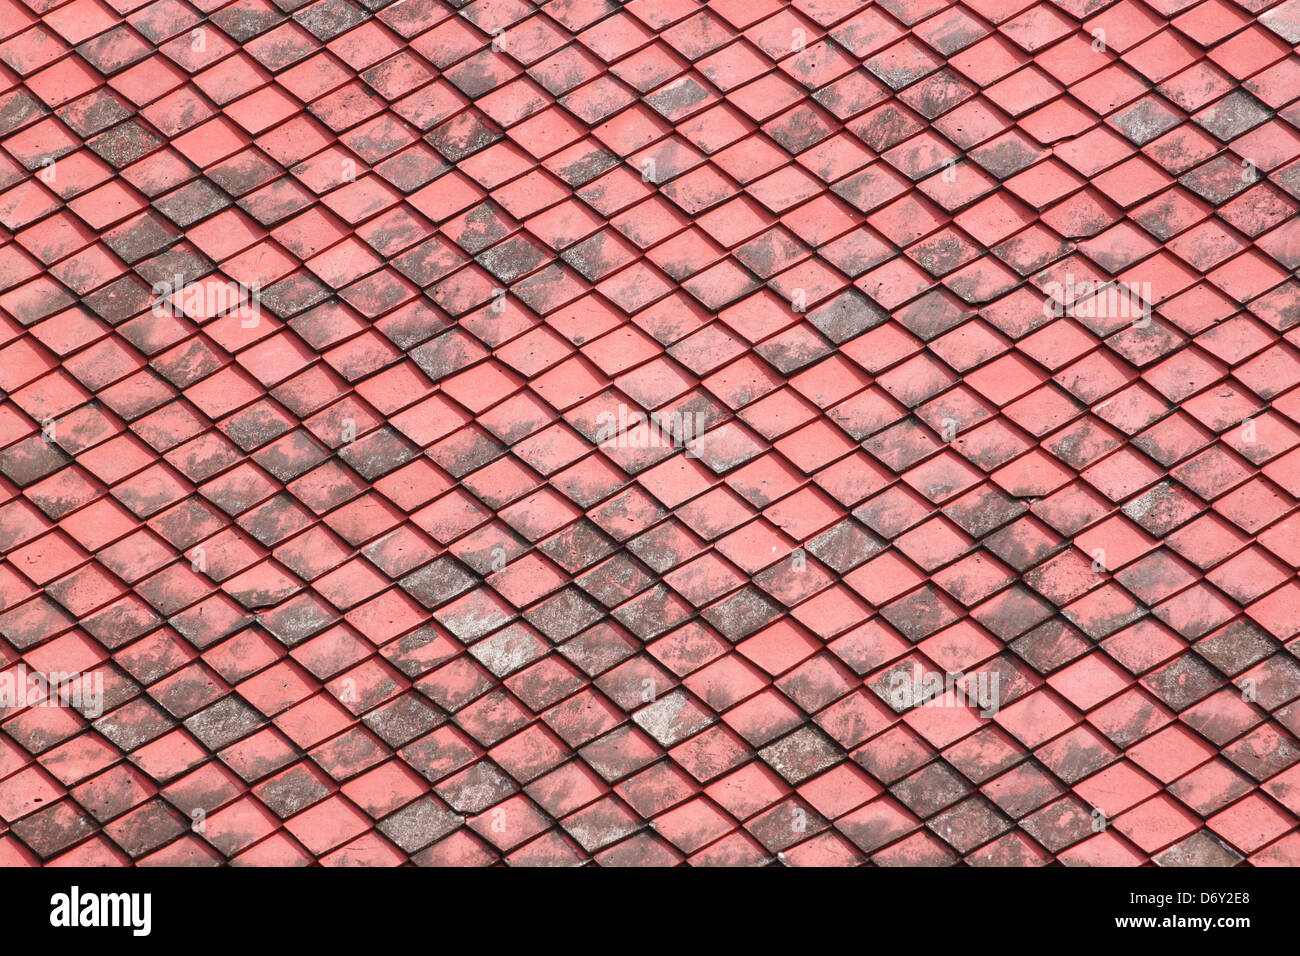 Red old Tiles roof in The Temple of Thailand. Stock Photo